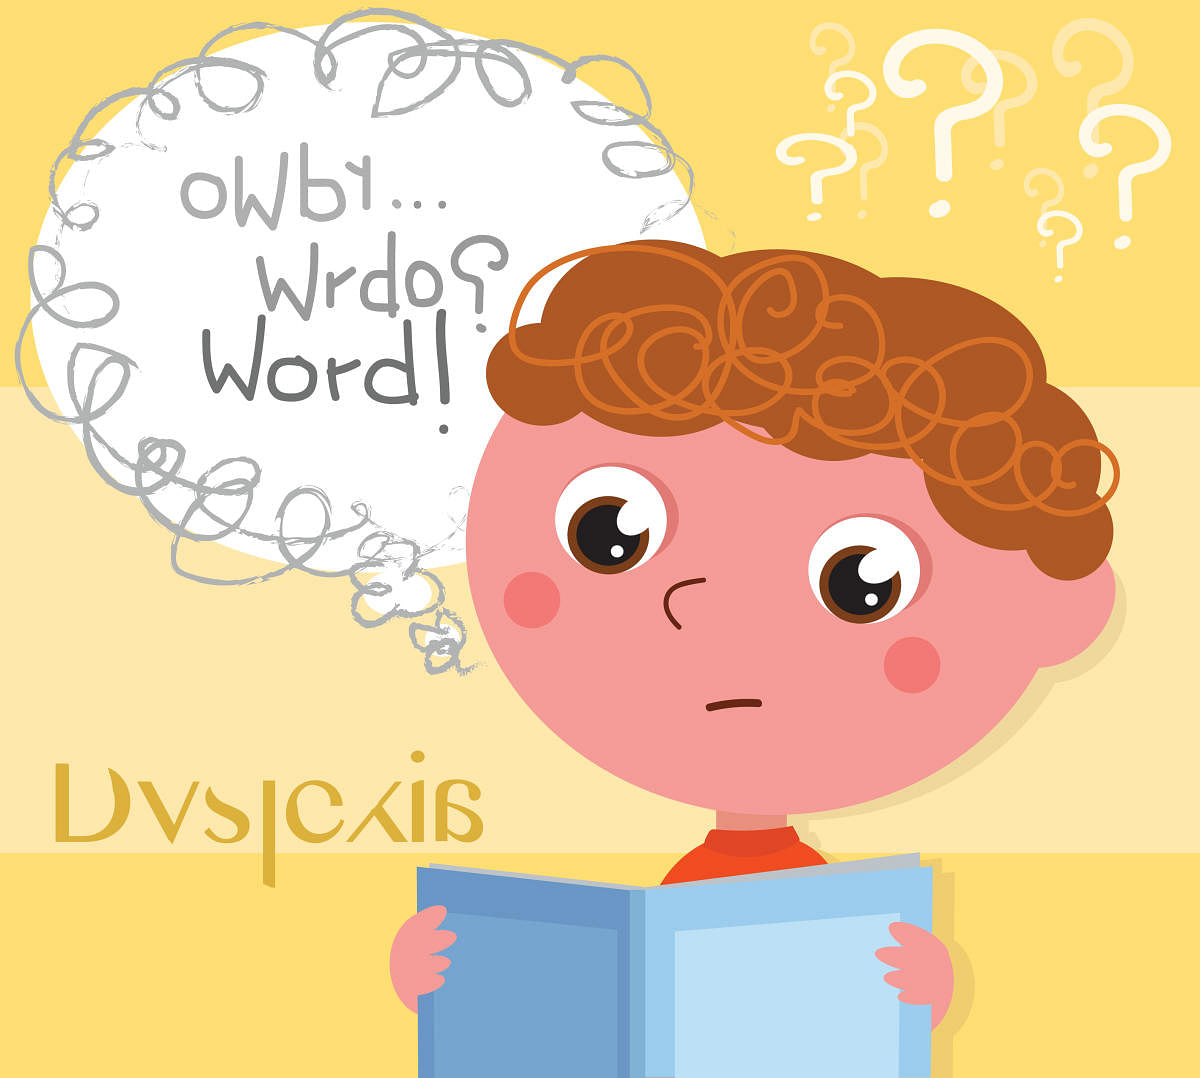 Since children with dyslexia find it difficult to manage time, they need to be assisted to prepare schedules, estimation of time, priorities for activities like studies, assignments, sports, hobbies etc.